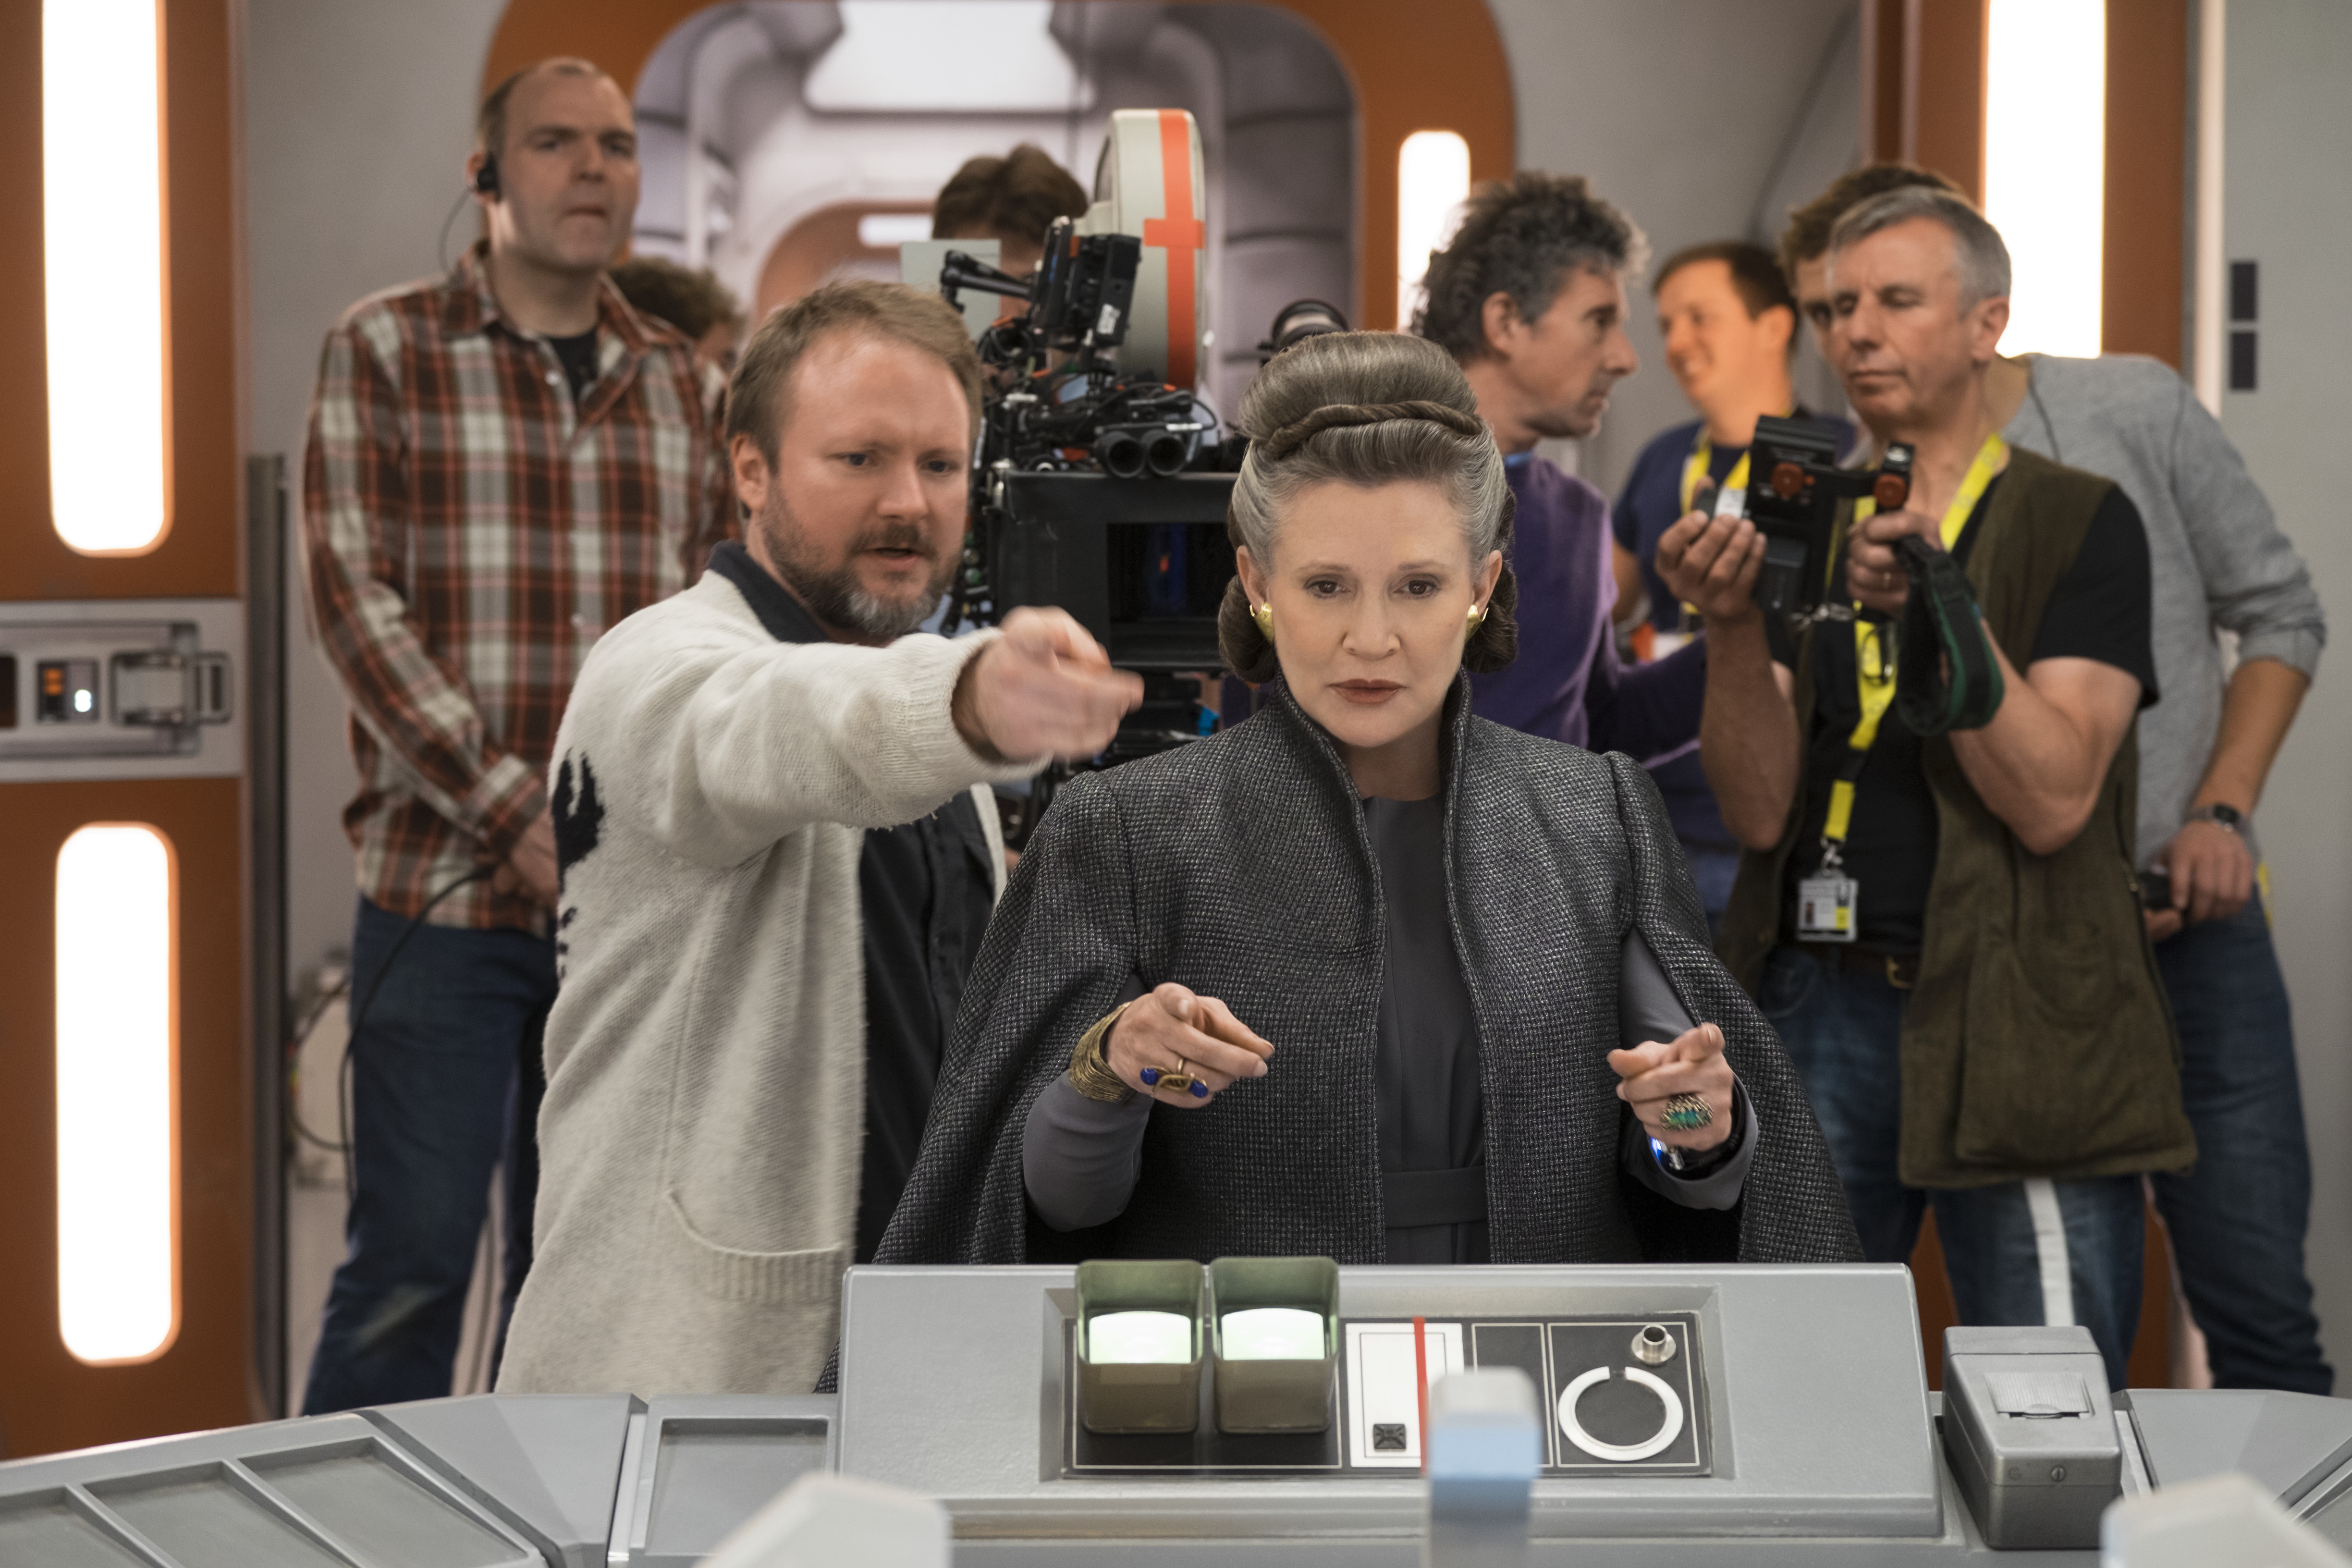 Princess Leia Forever - The Heroines of "Star Wars: The Last Jedi"